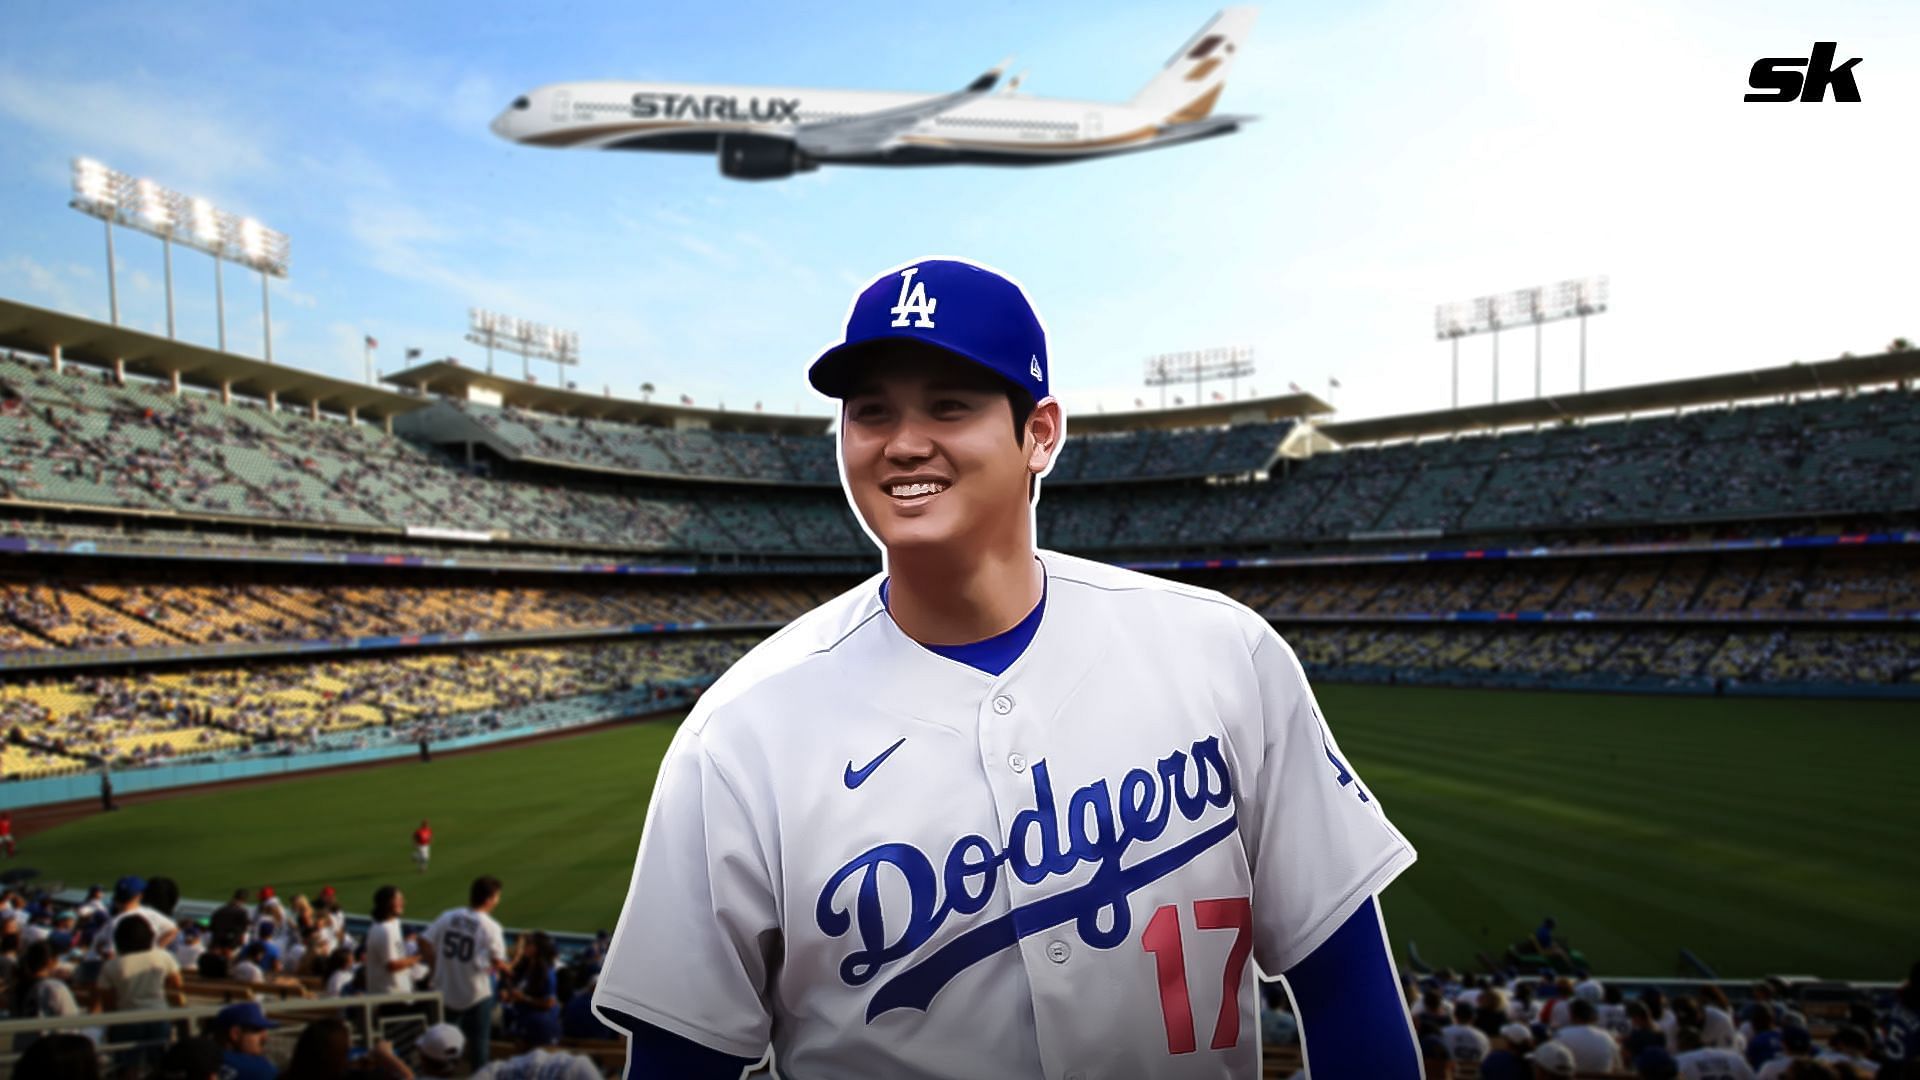 Starlux Airlines renews exclusive partnership with LA Dodgers